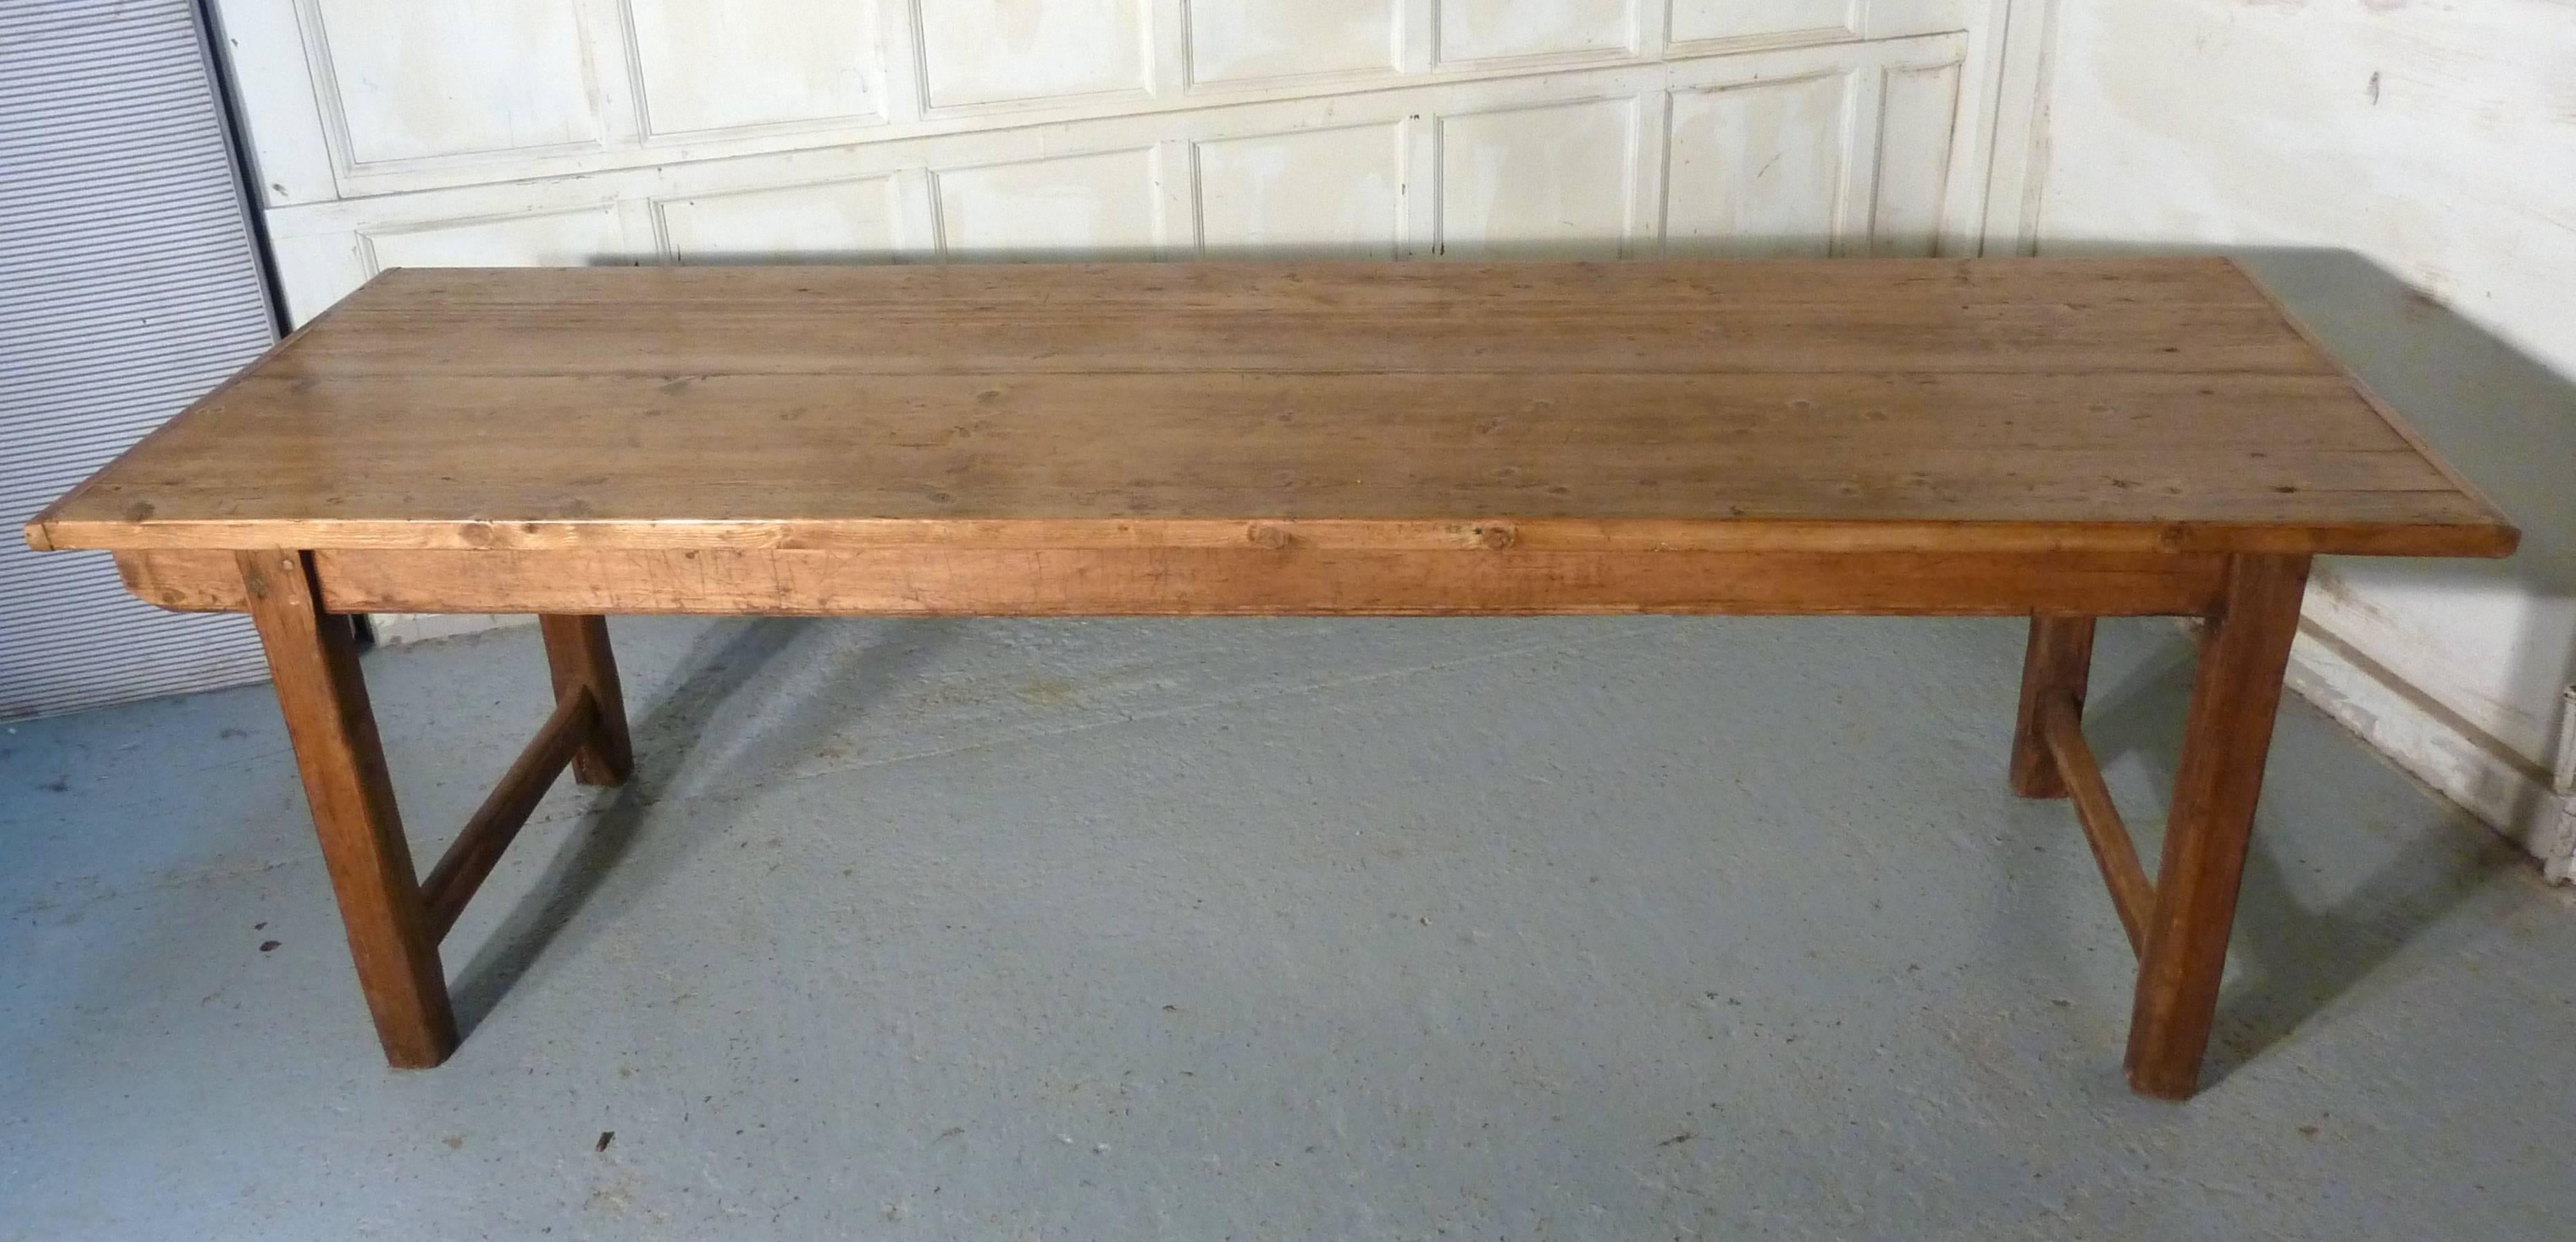 This long farmhouse table dates from circa 1890.
The four plank tabletop is 1” thick with cleated ends, there is plenty of character to be seen on this piece providing you like the Rustic Look.
The tabletop has some old wood worm runs and there